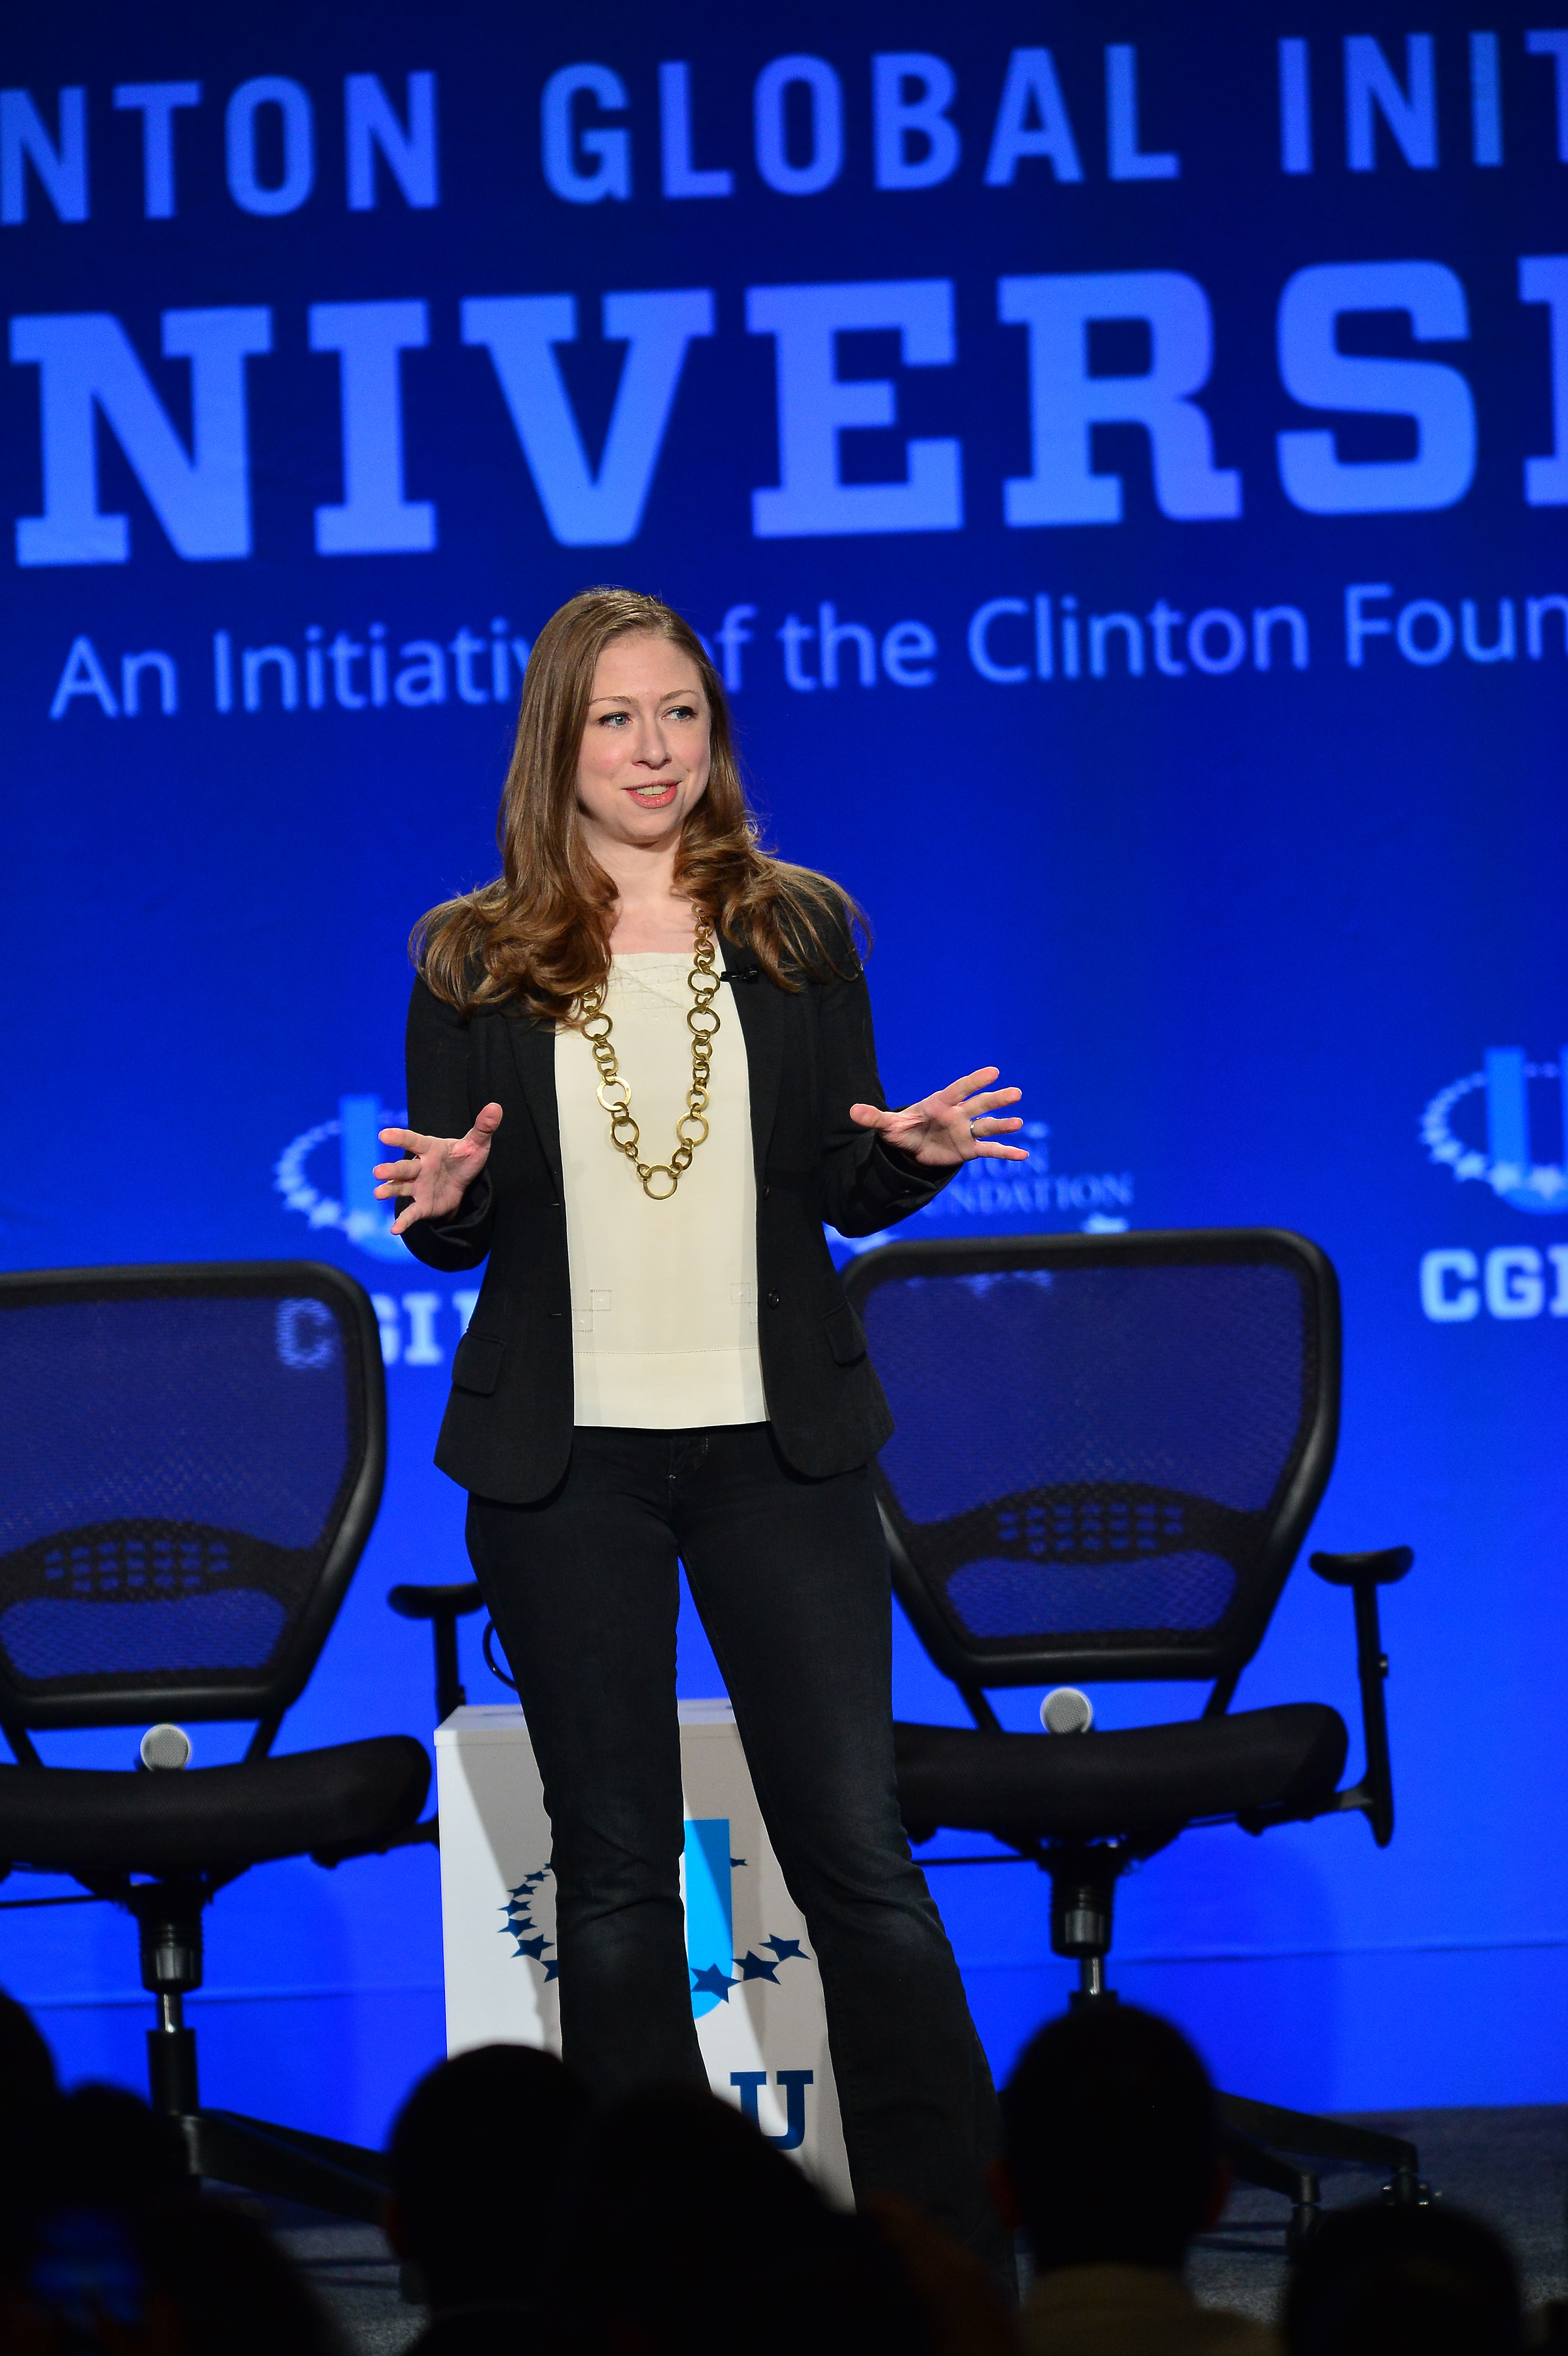 Vice Chair of Clinton Foundation Chelsea Clinton attends Clinton Global Initiative University - Fast Forward: Accelerating Opportunity for All at University of Miami on March 6, 2015 in Miami, Florida. (Johnny Louis&amp;mdash;WireImage)